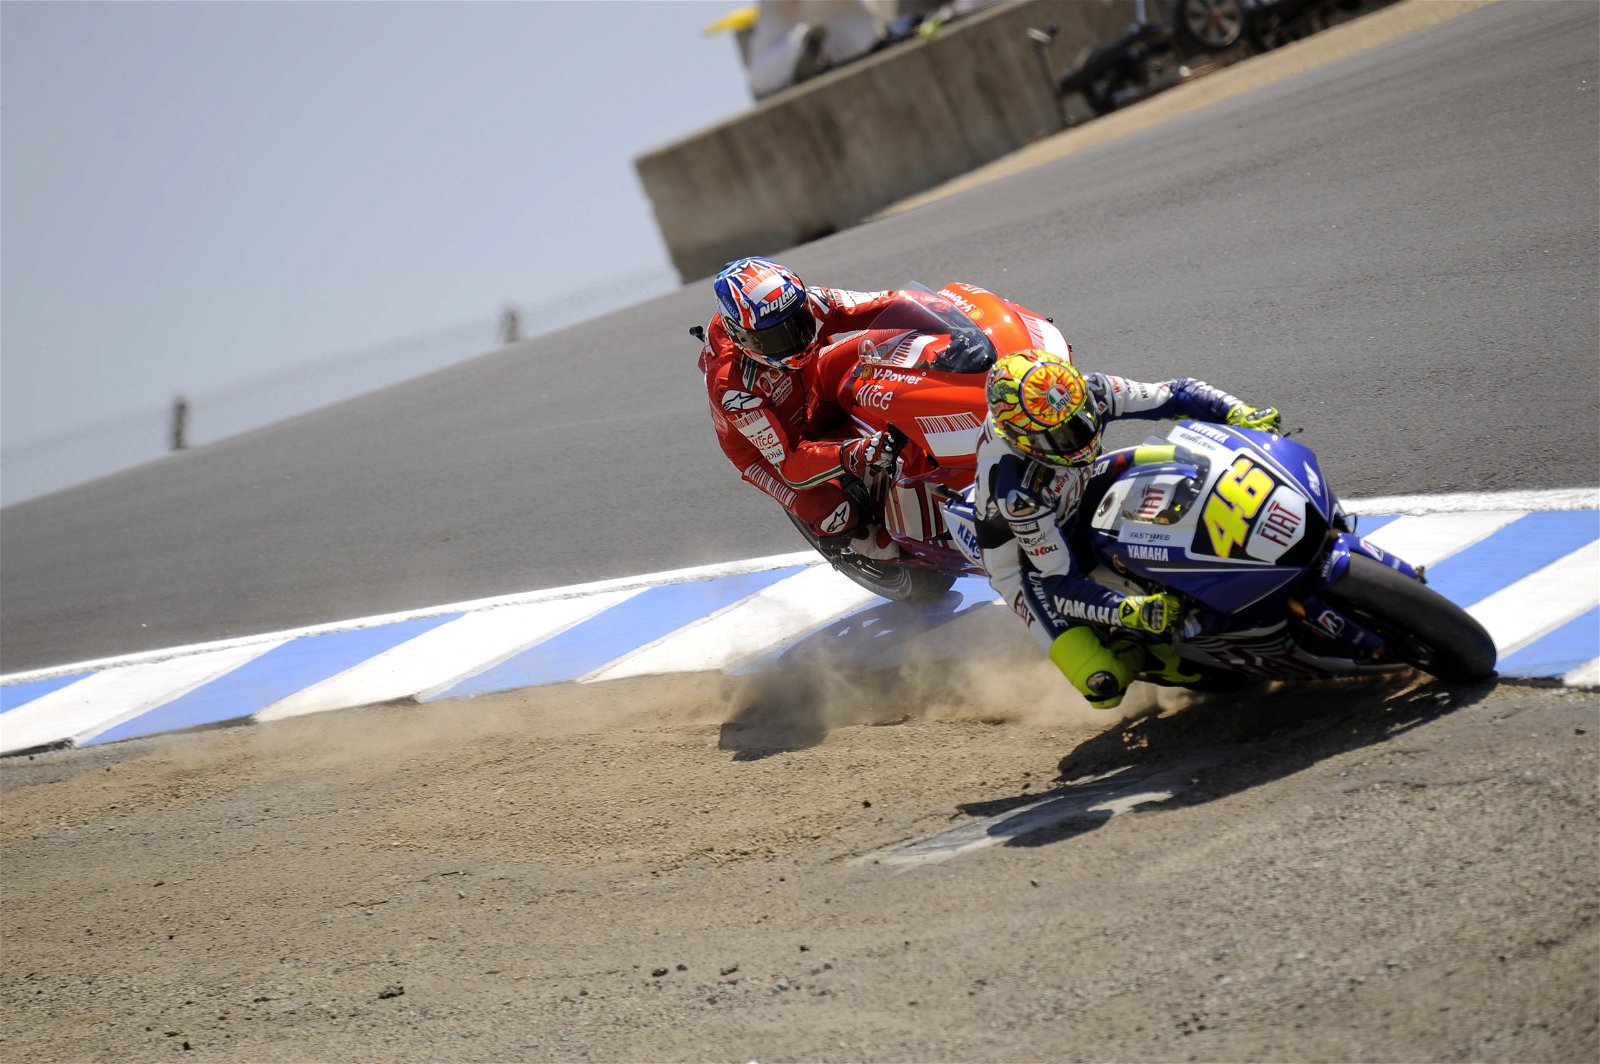 Races such as this classic at Laguna Seca stoked the rivalry between Valentino Rossi and Casey Stoner. Image: Yamaha Factory Racing